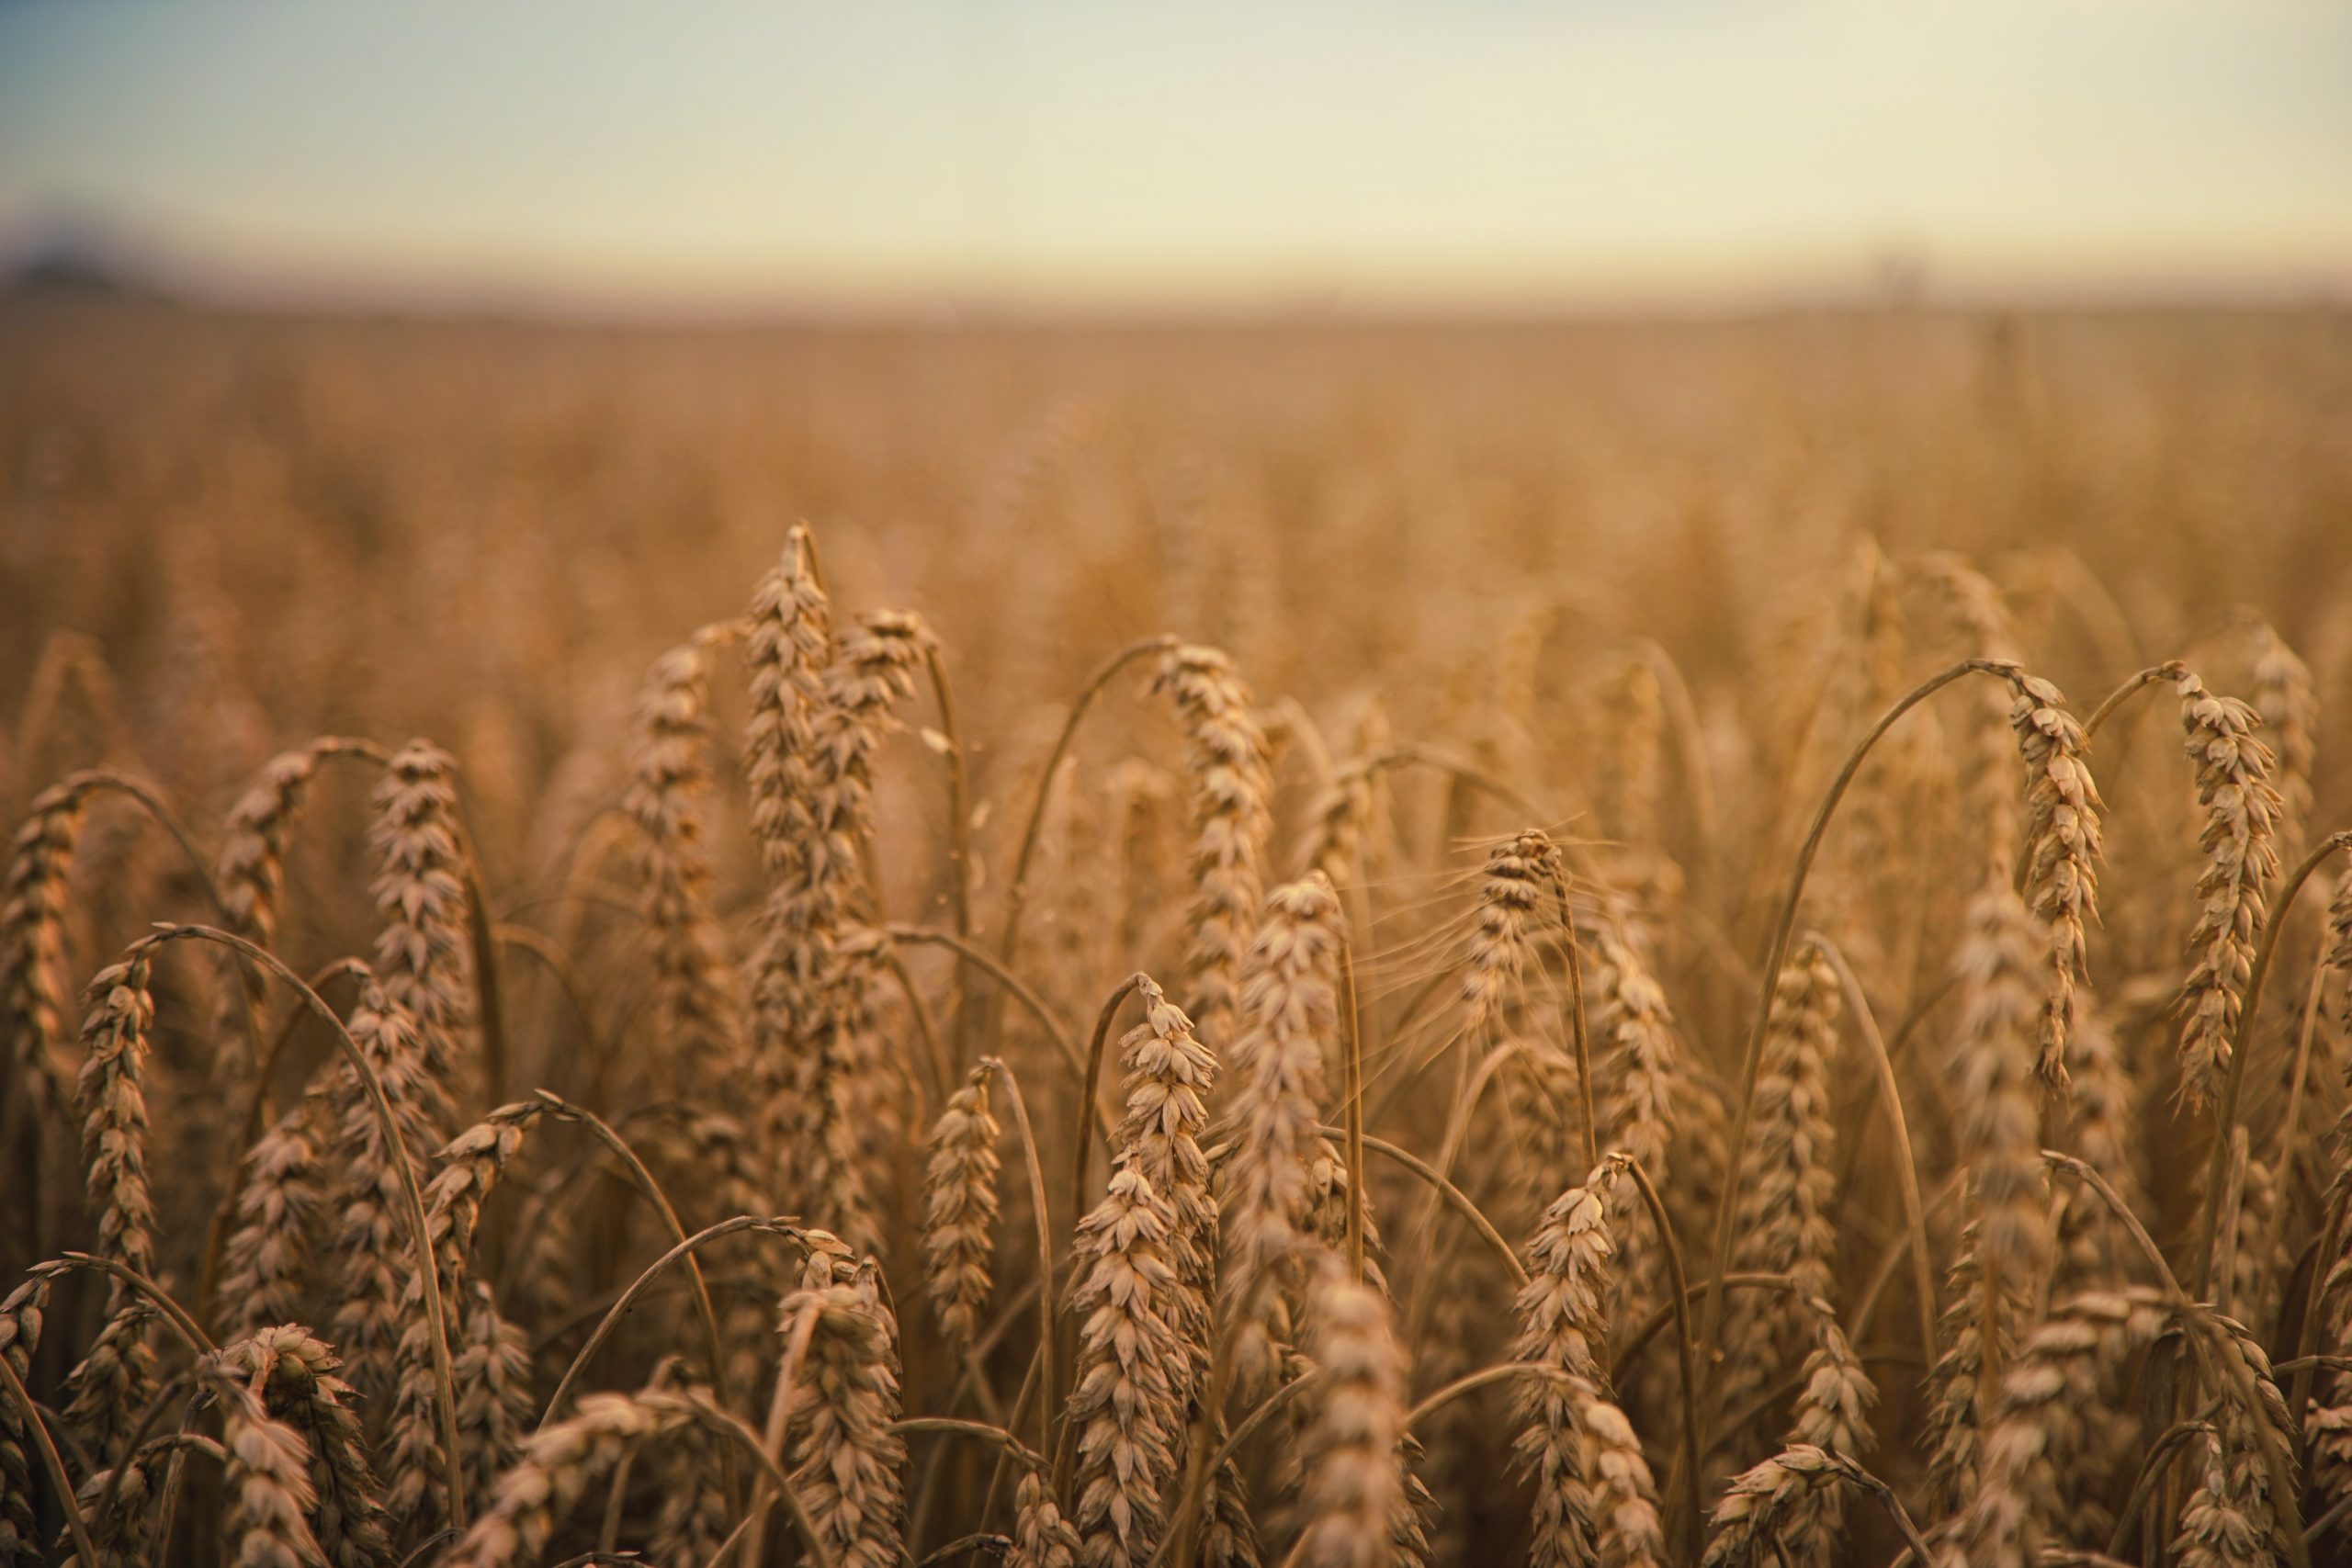 The significance of climate variability on early modern European grain prices